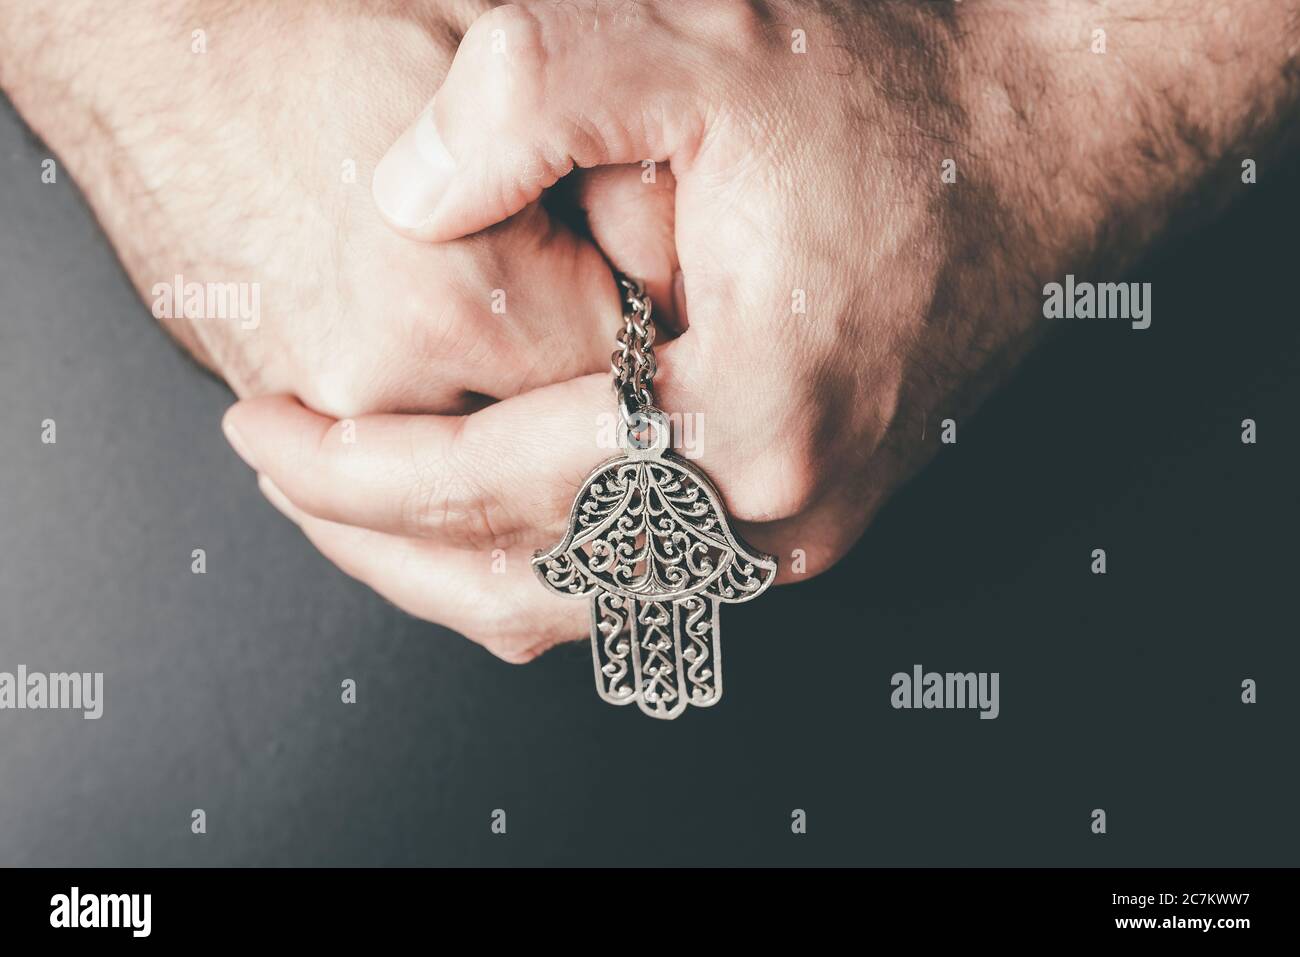 close-up of folded hands holding Hamsa amulet also known as Hand of Fatima used to protect against evil eye,, unluckiness, illness and bad fortune Stock Photo